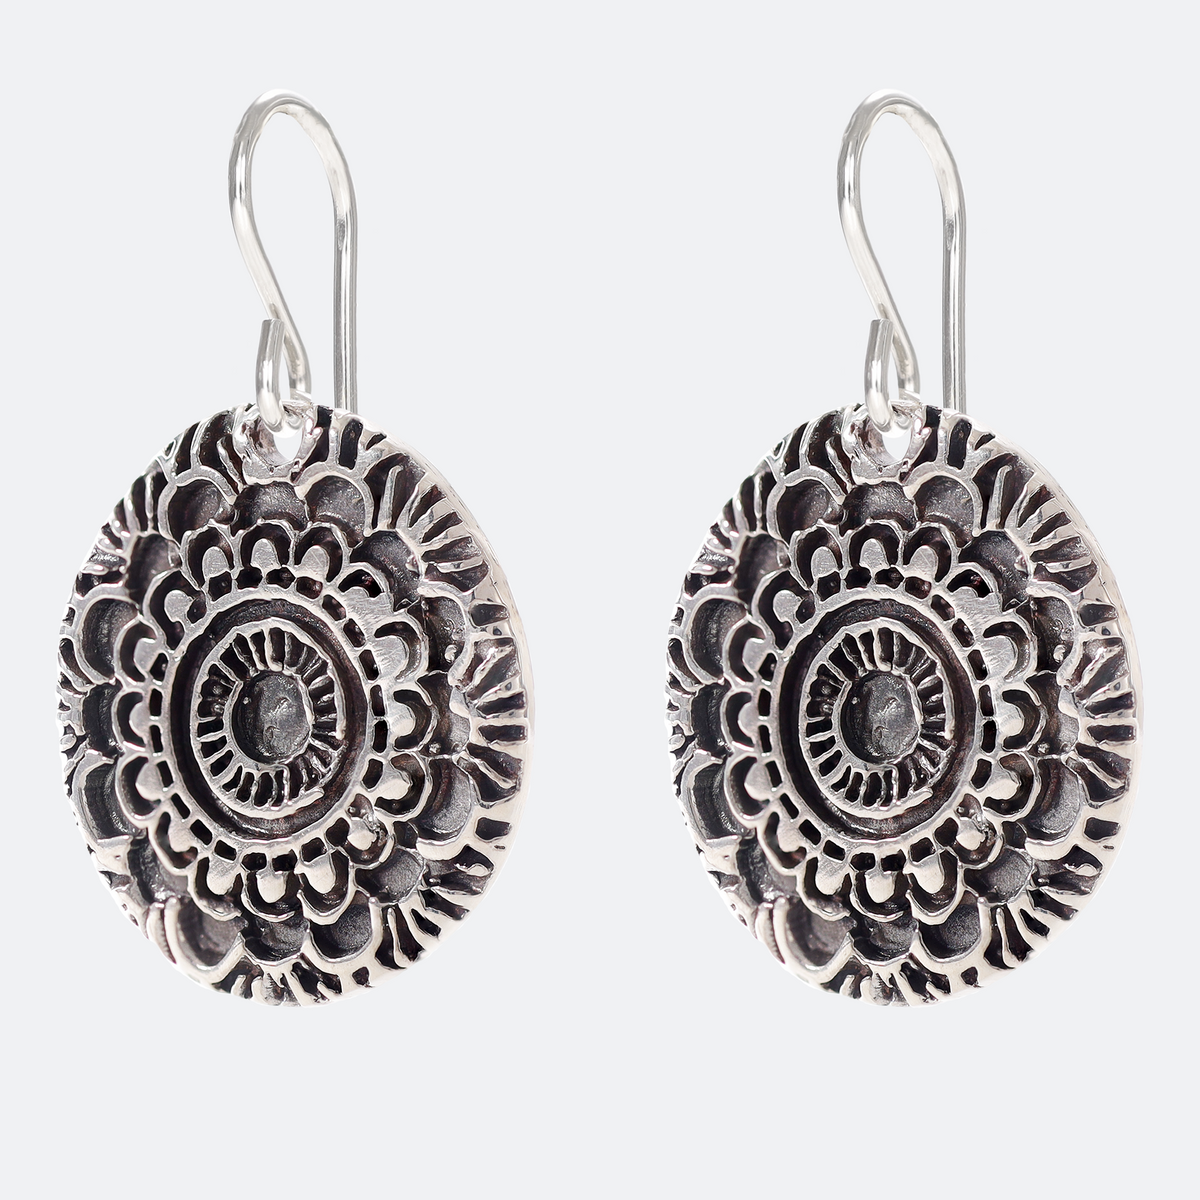 Mandala Textured Large Sterling Silver Earrings on Short Ear Wires